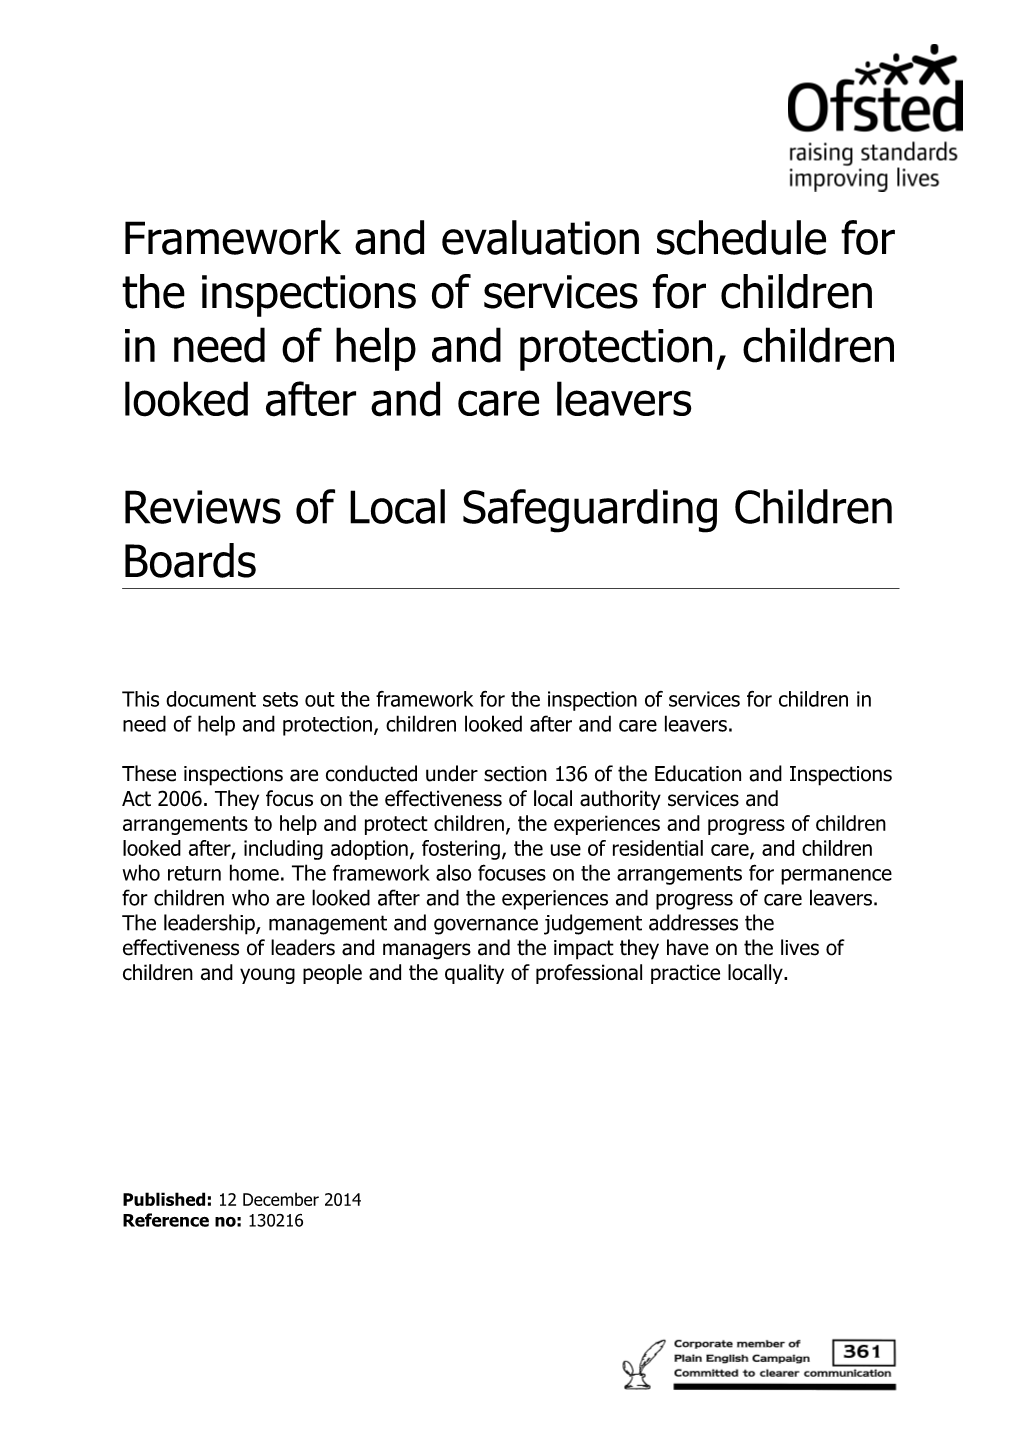 Framework and Evaluation Schedule - Inspection of LA Children's Services